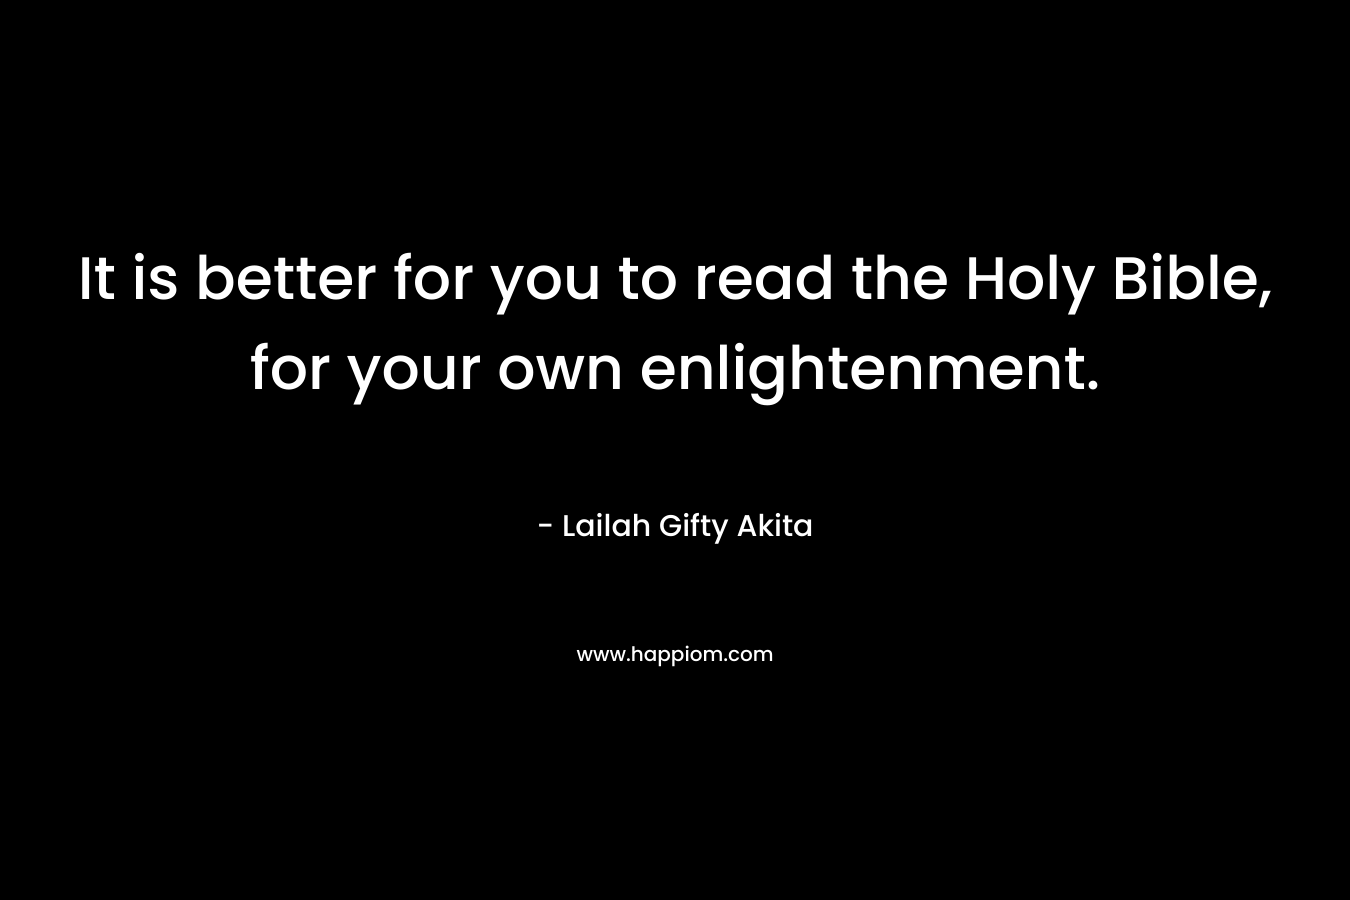 It is better for you to read the Holy Bible, for your own enlightenment.